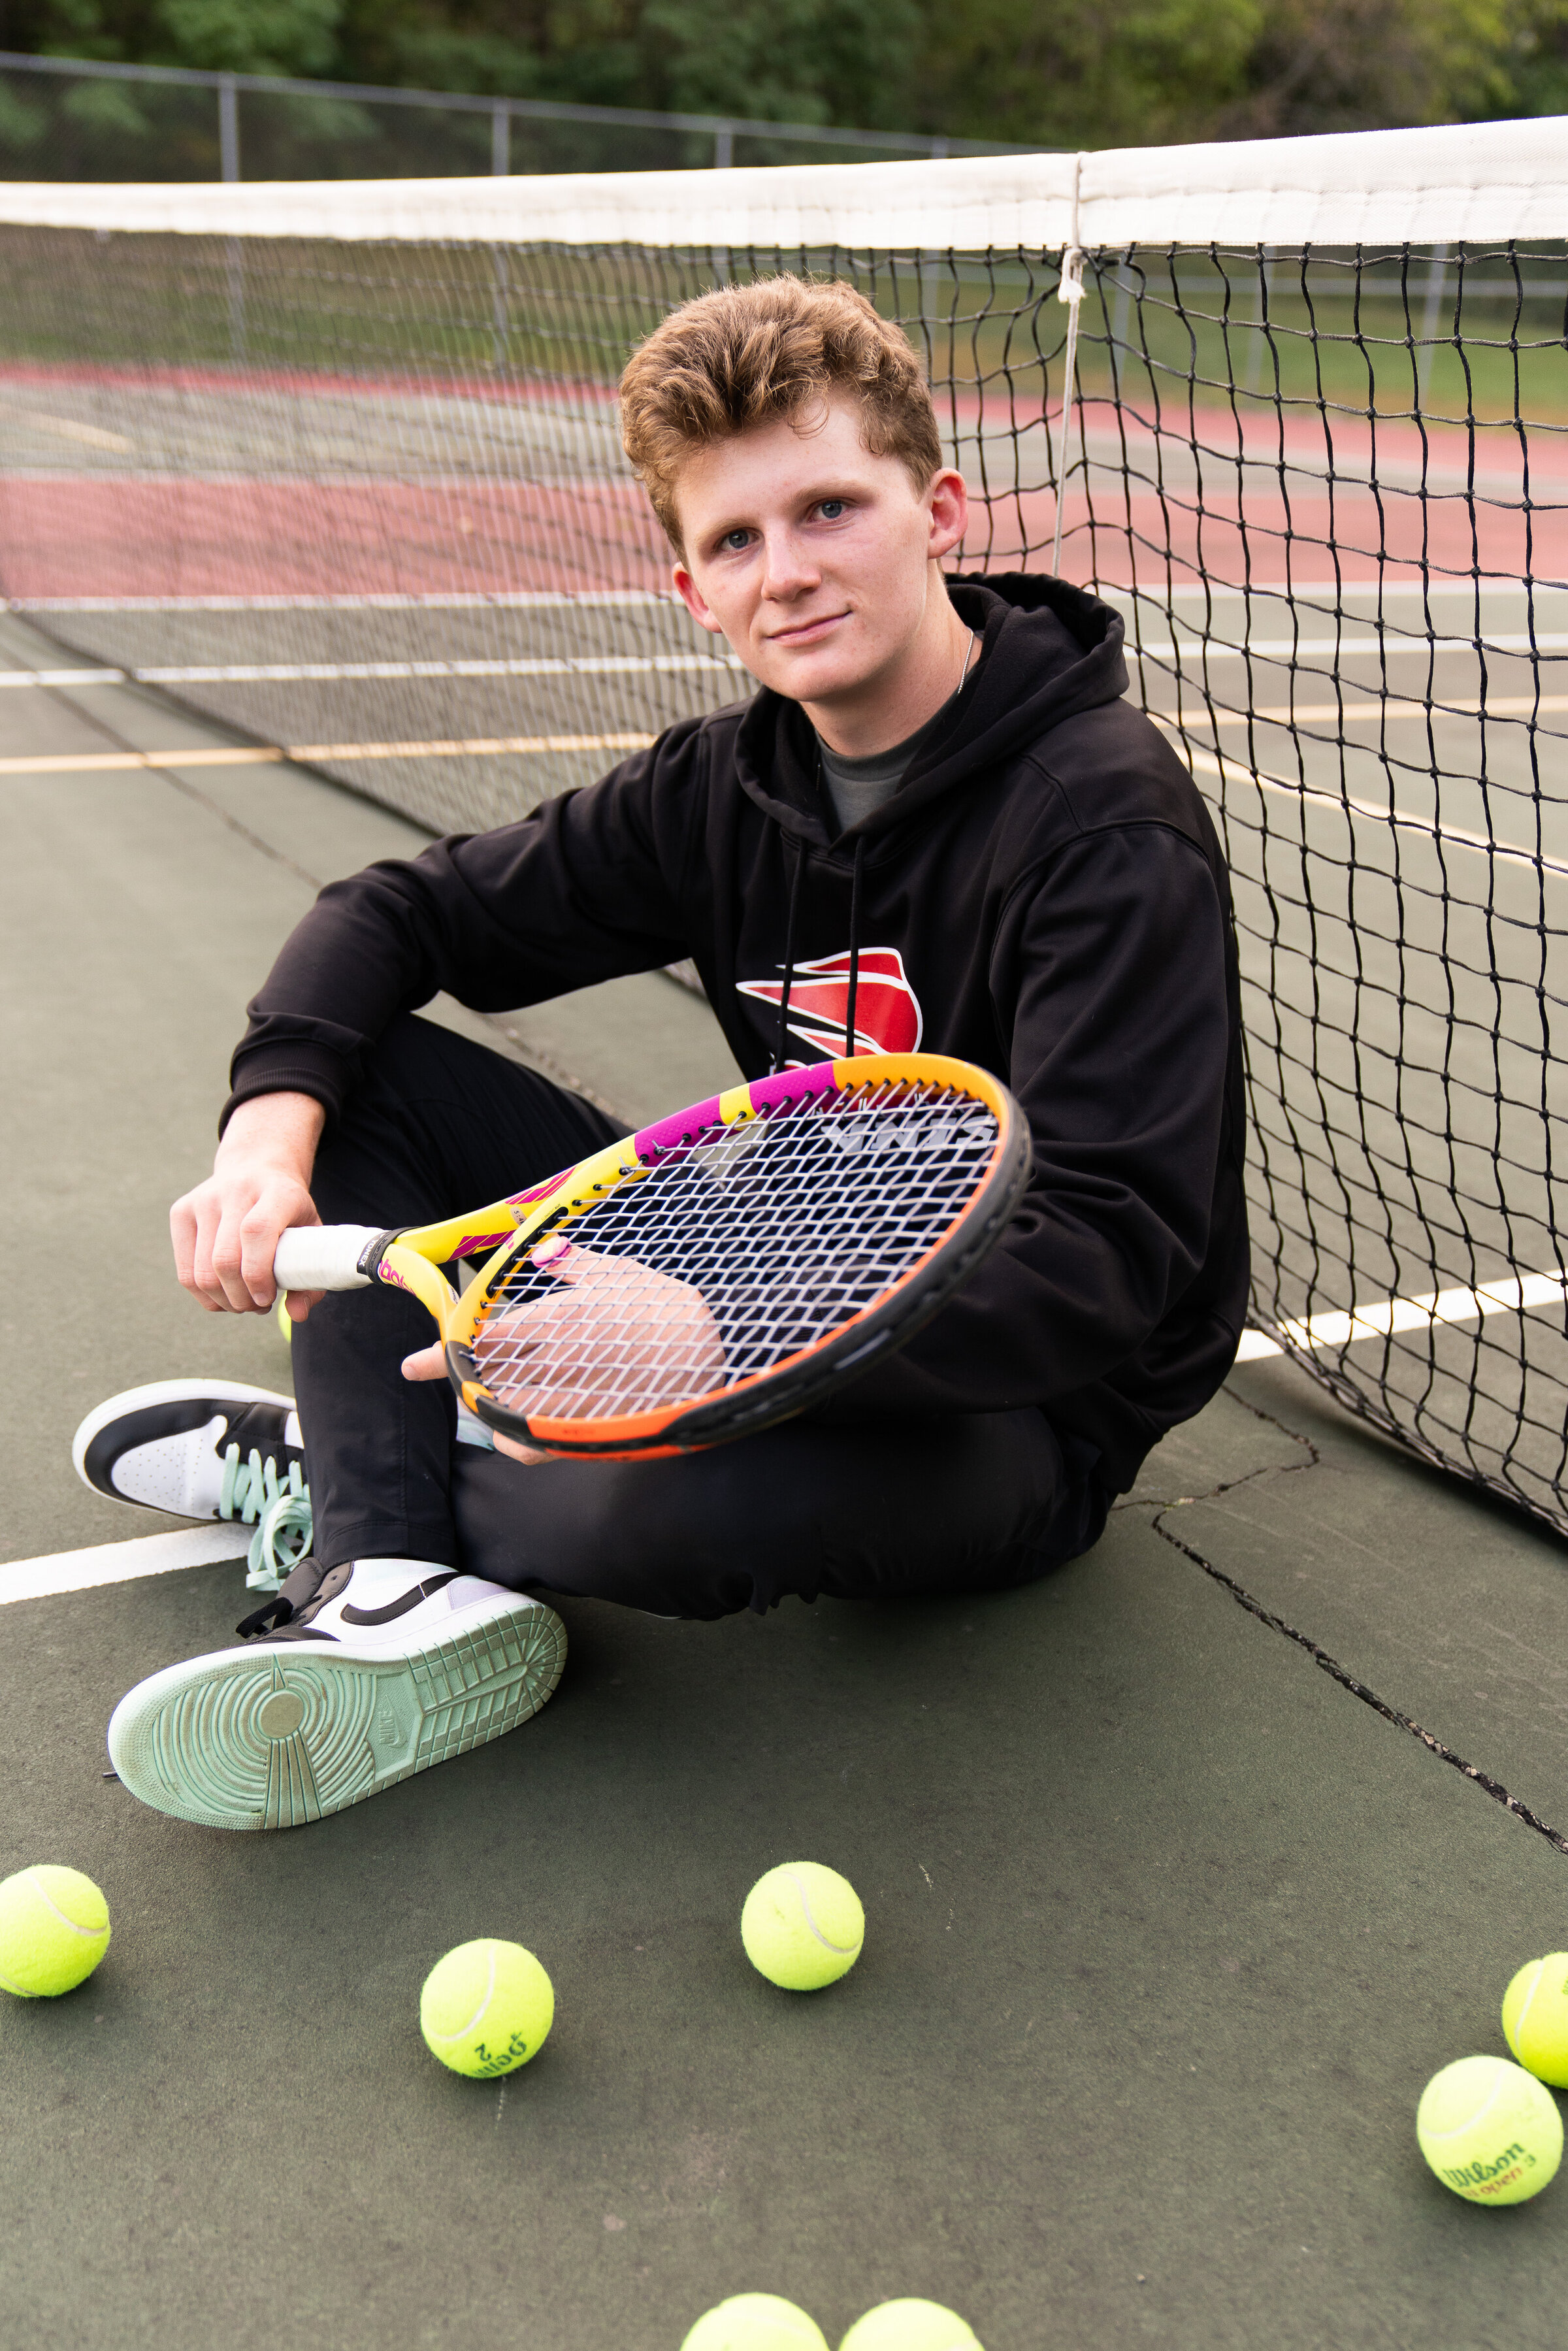 Senior pictures at a tennis court in Lakeville, Minnesota